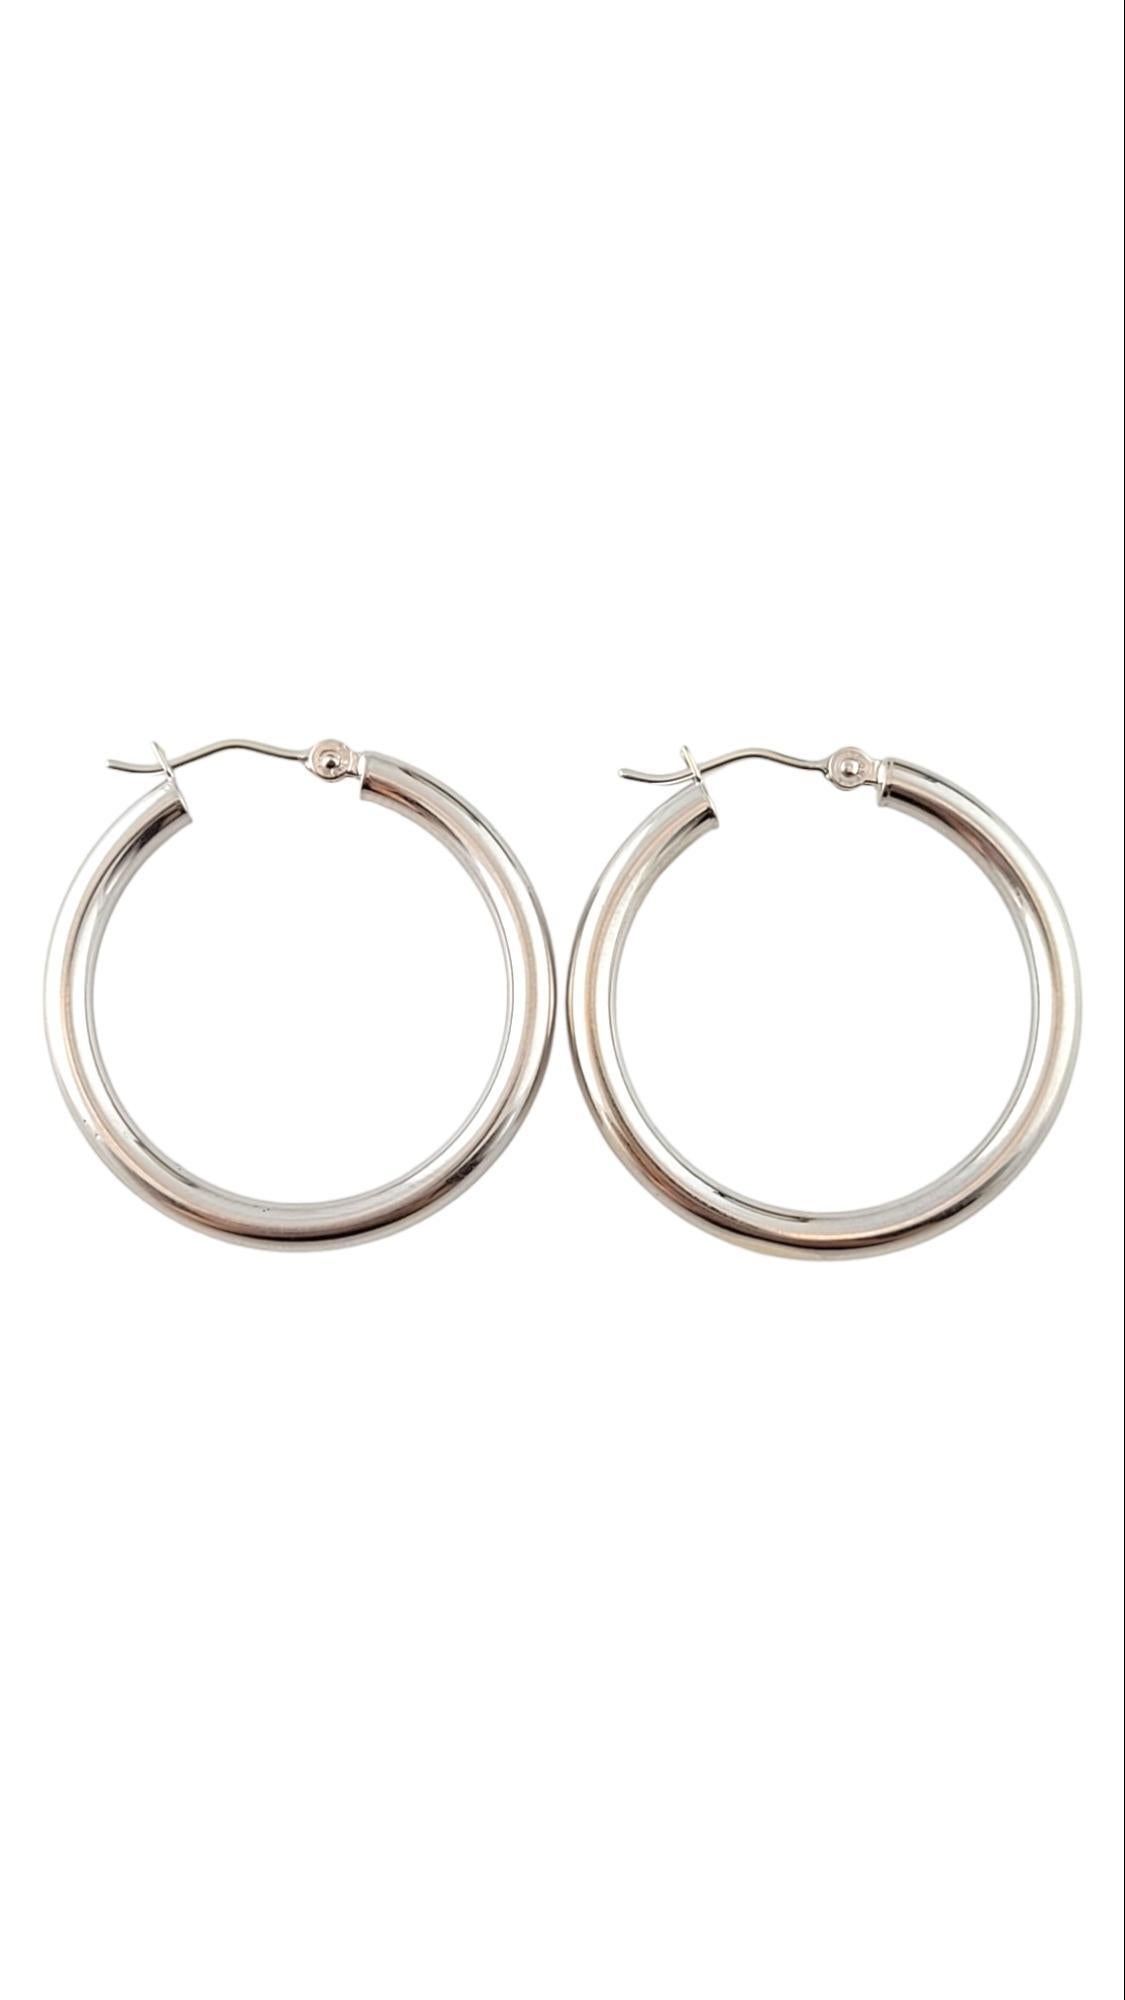 14K White Gold Hoops

This classic set of gorgeous 14K white golf hoops would look beautiful on everyone!

Size: 30.6mm X 30.1mm X 3.0mm

Weight: 2.34 g / 1.5 dwt

Hallmark: RCI 14K

Very good condition, professionally polished.

Will come packaged